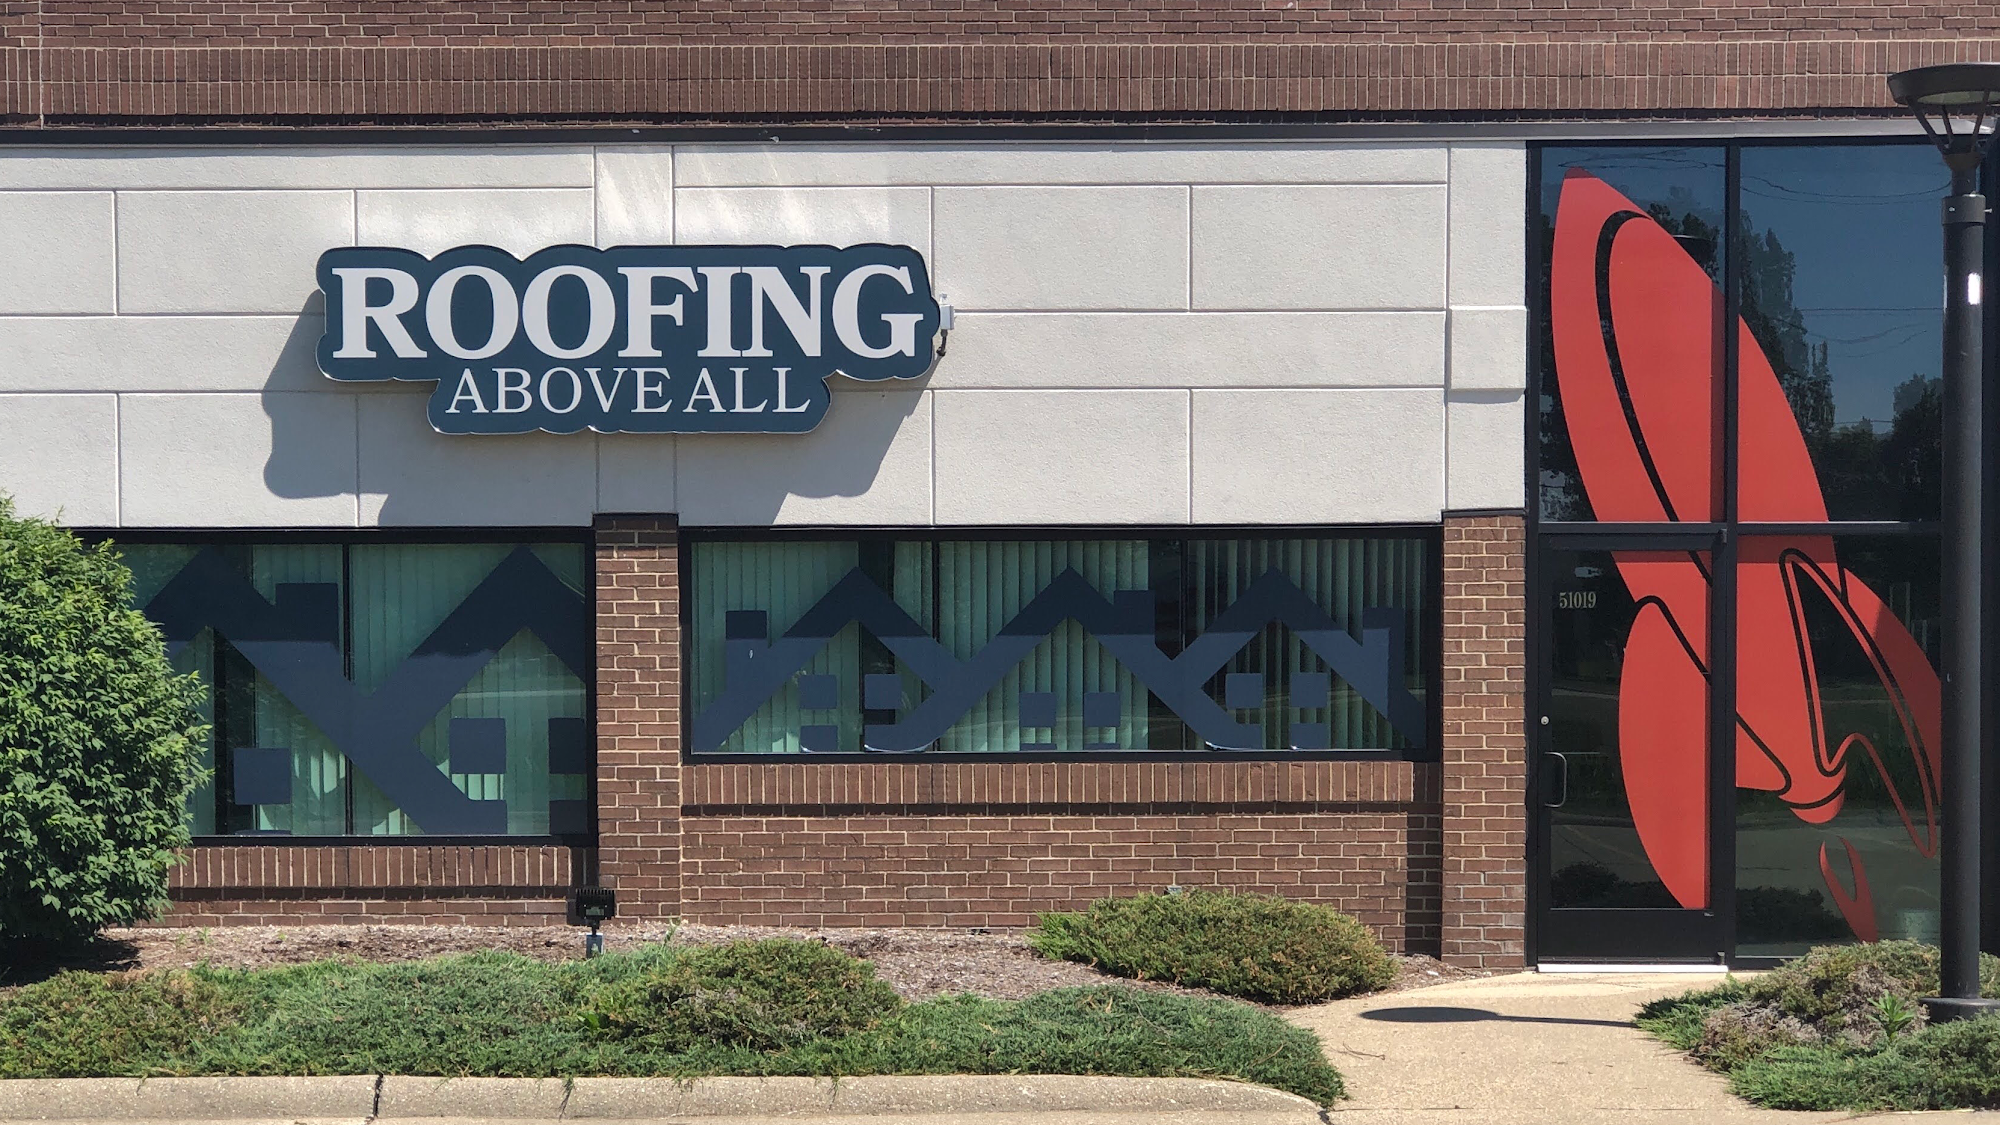 Roofing Above All | Ridgecon Construction, Inc.